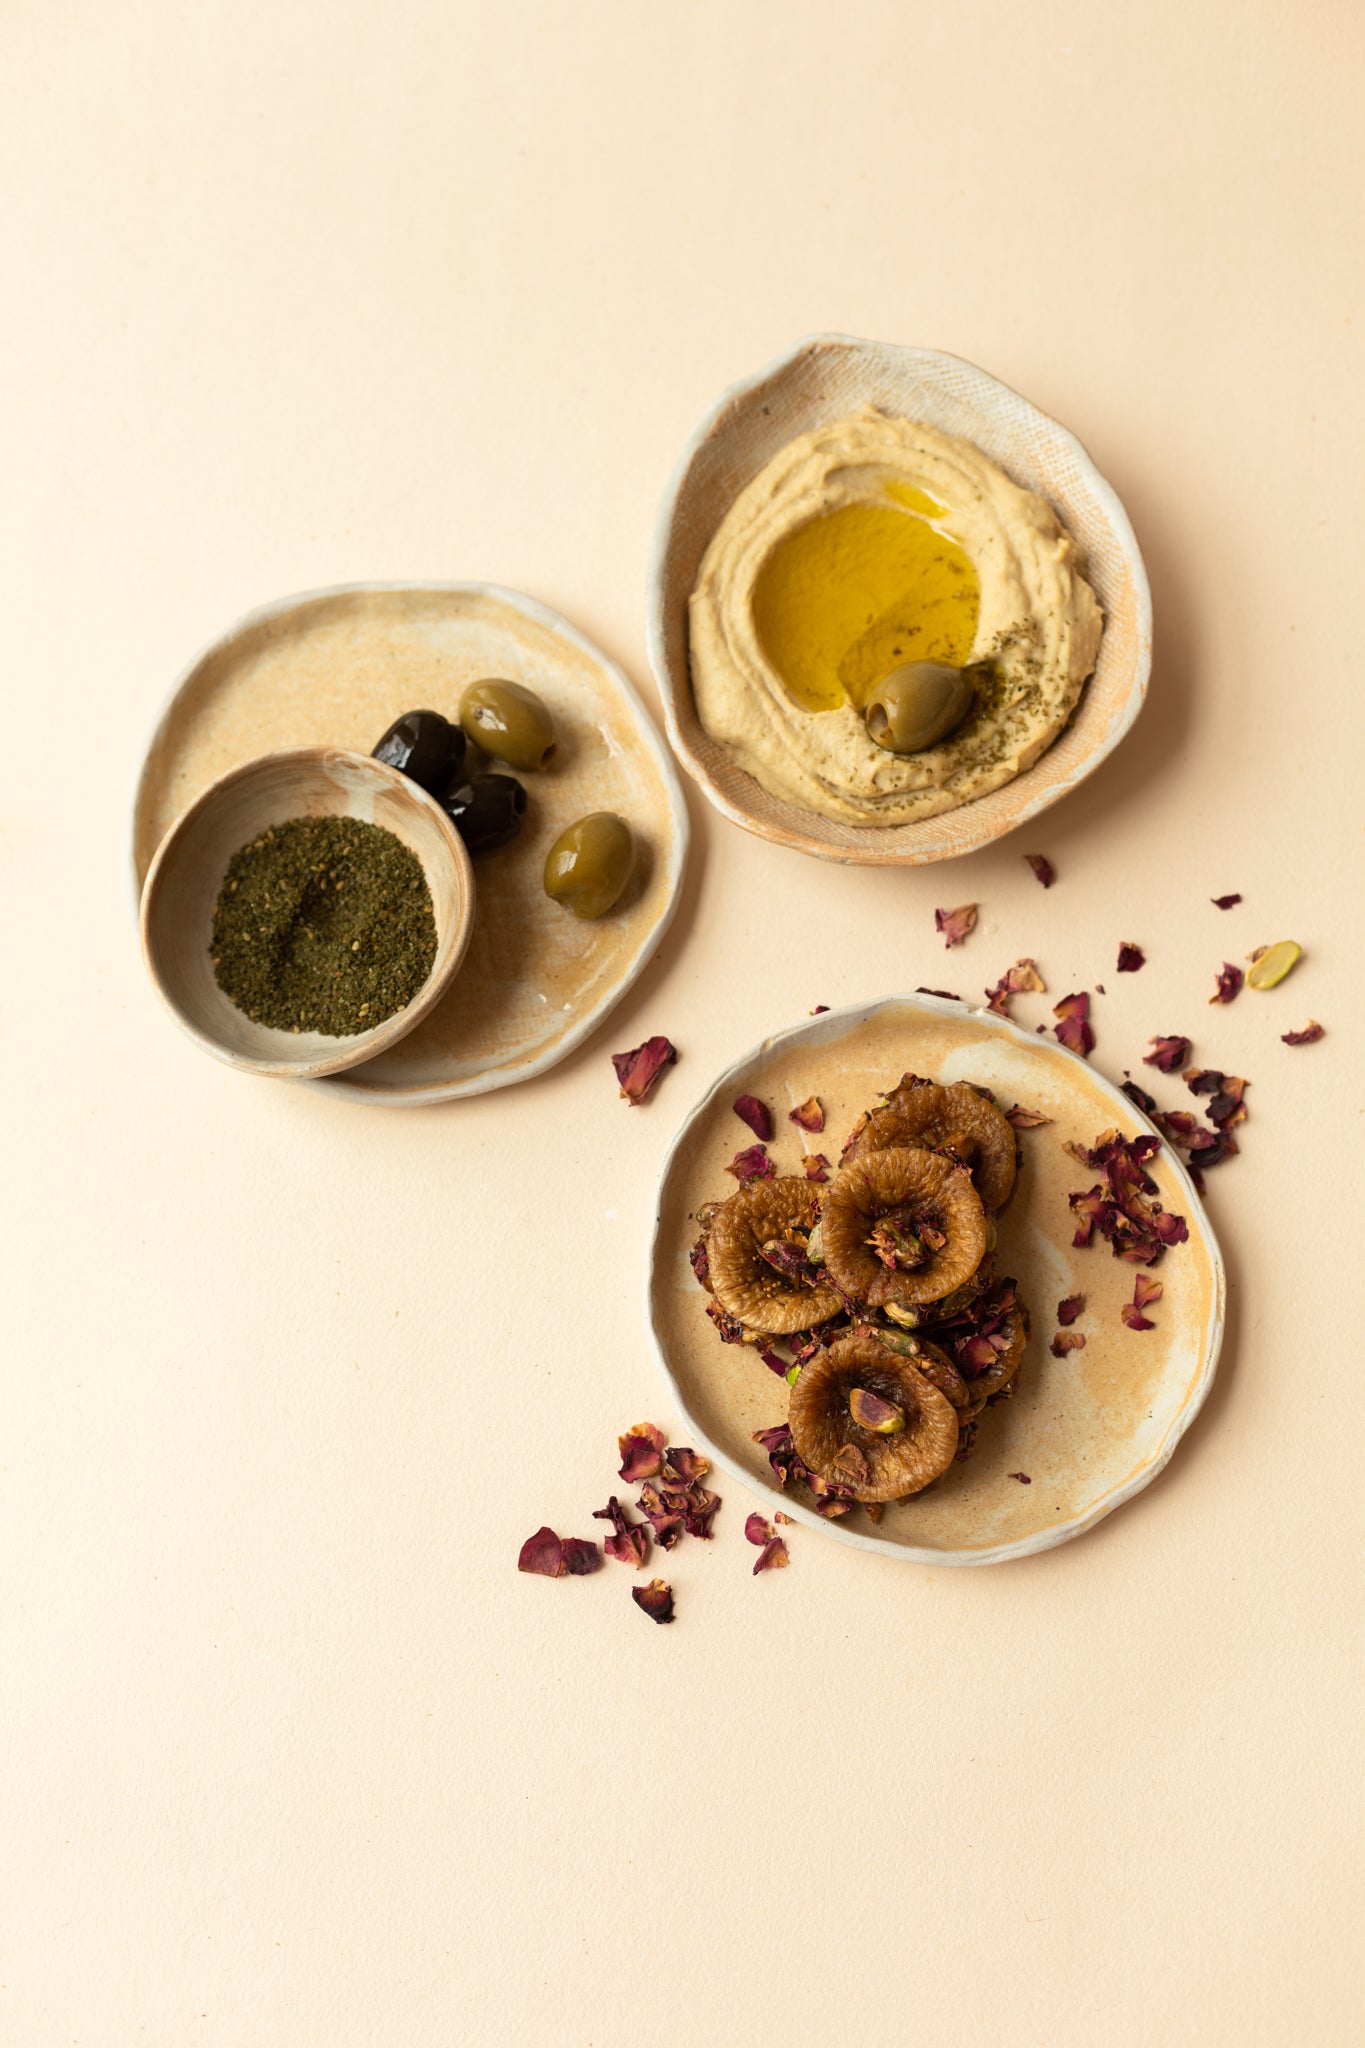 Pistachio & rose caramelised with natural cane sugar and stuffed in chewy, Afghani figs